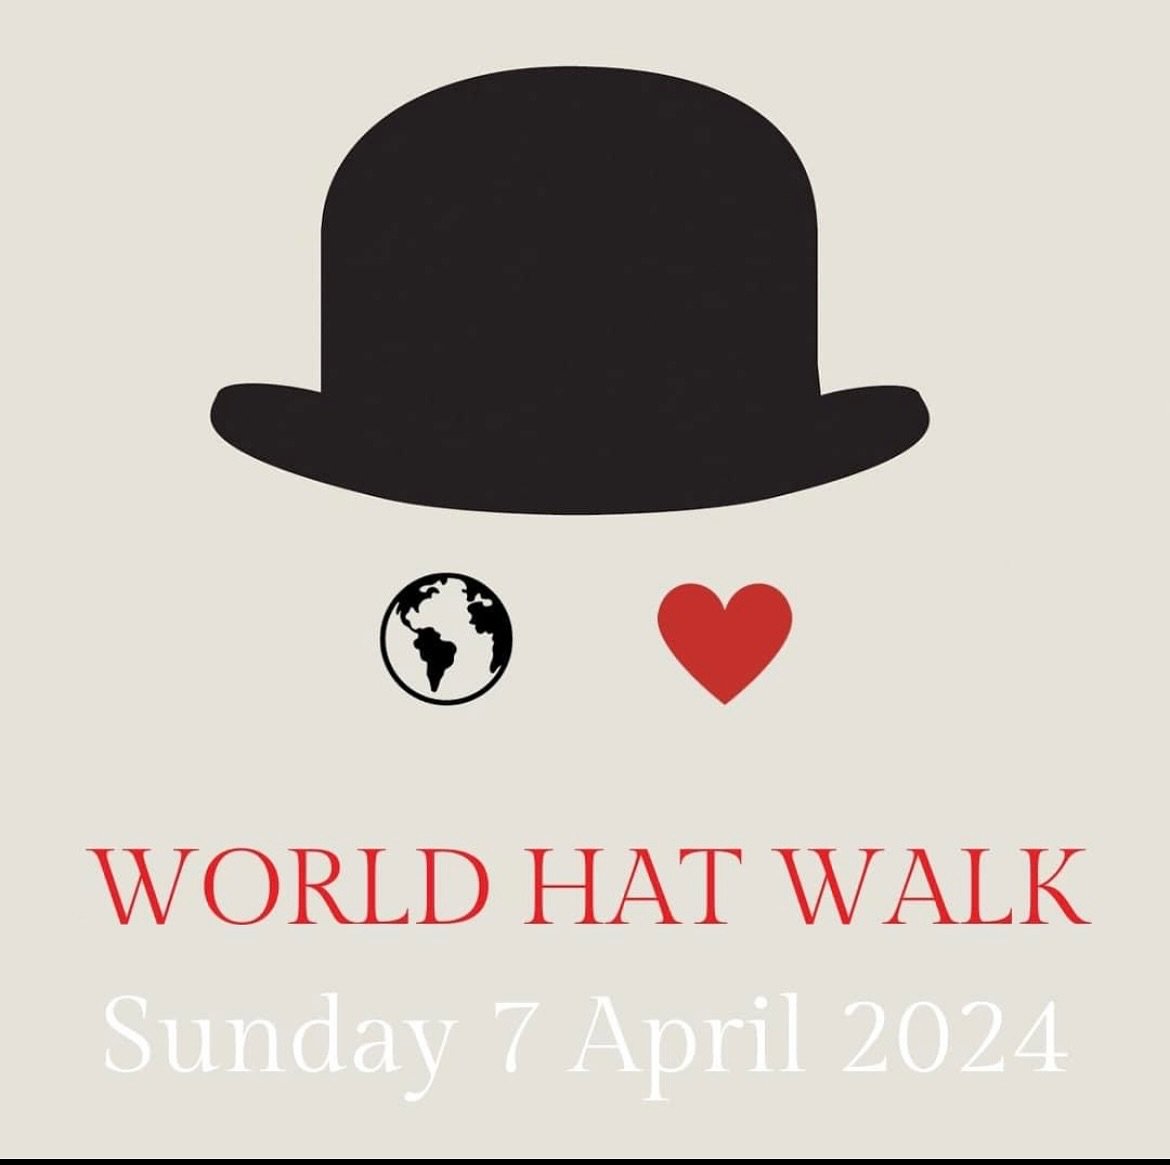 Who&rsquo;s coming? ✋

2024 marks the 30th Anniversary of Millinery Australia and the 10th Anniversary of London Hat Week. To mark these milestones, Millinery Australia, in collaboration with London Hat Week, are coordinating a visual treat together 